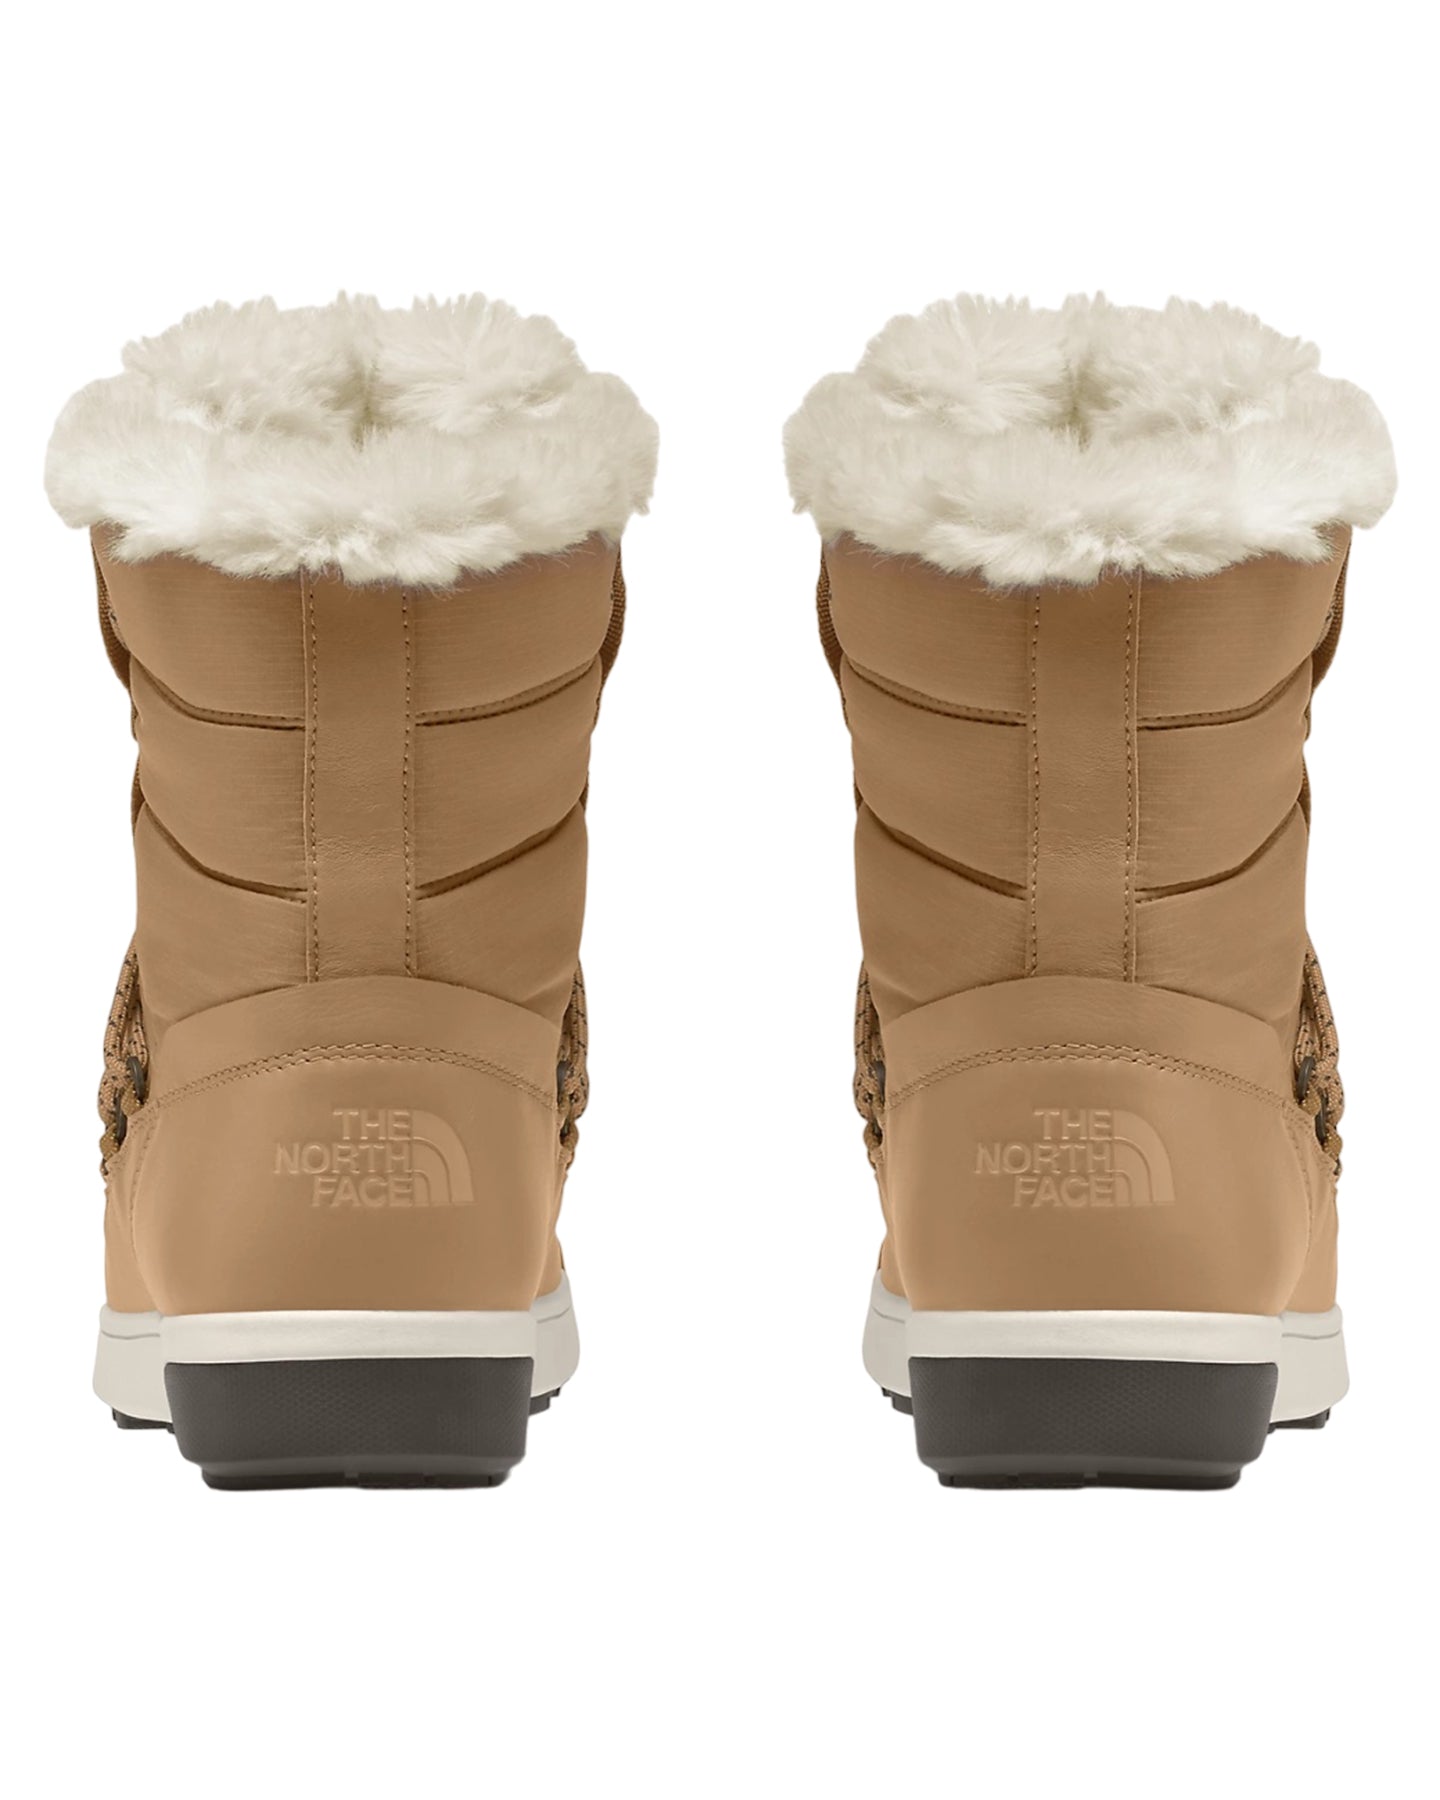 The North Face Women's Sierra Luxe Waterproof Apres Boots - Almond Butter/Falconbrown Apres Boots - SnowSkiersWarehouse